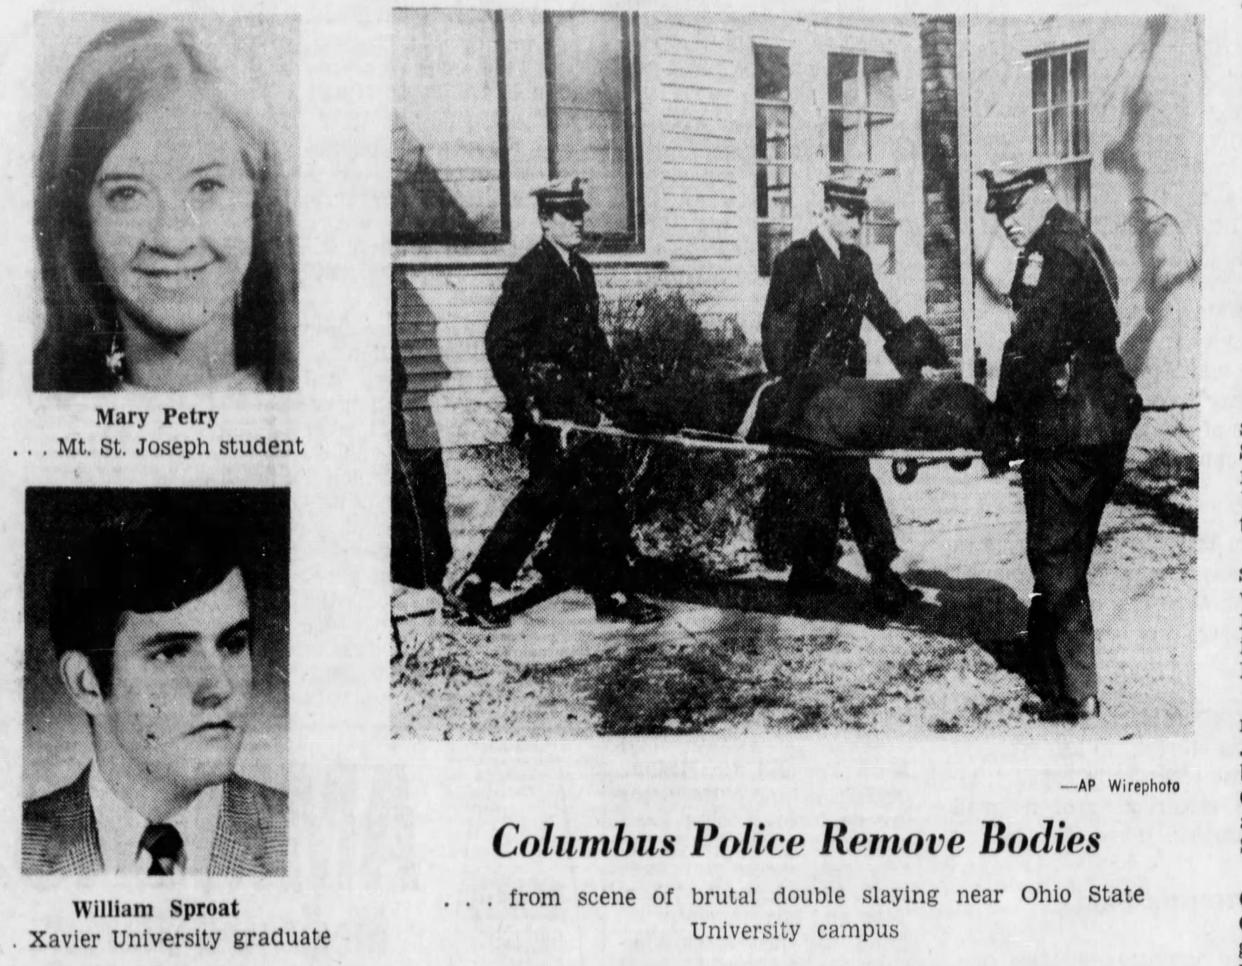 Mary Petry and Bill Sproat's photos ran in The Cincinnati Enquirer after they were found murdered in Sproat's Columbus apartment in February 1970.